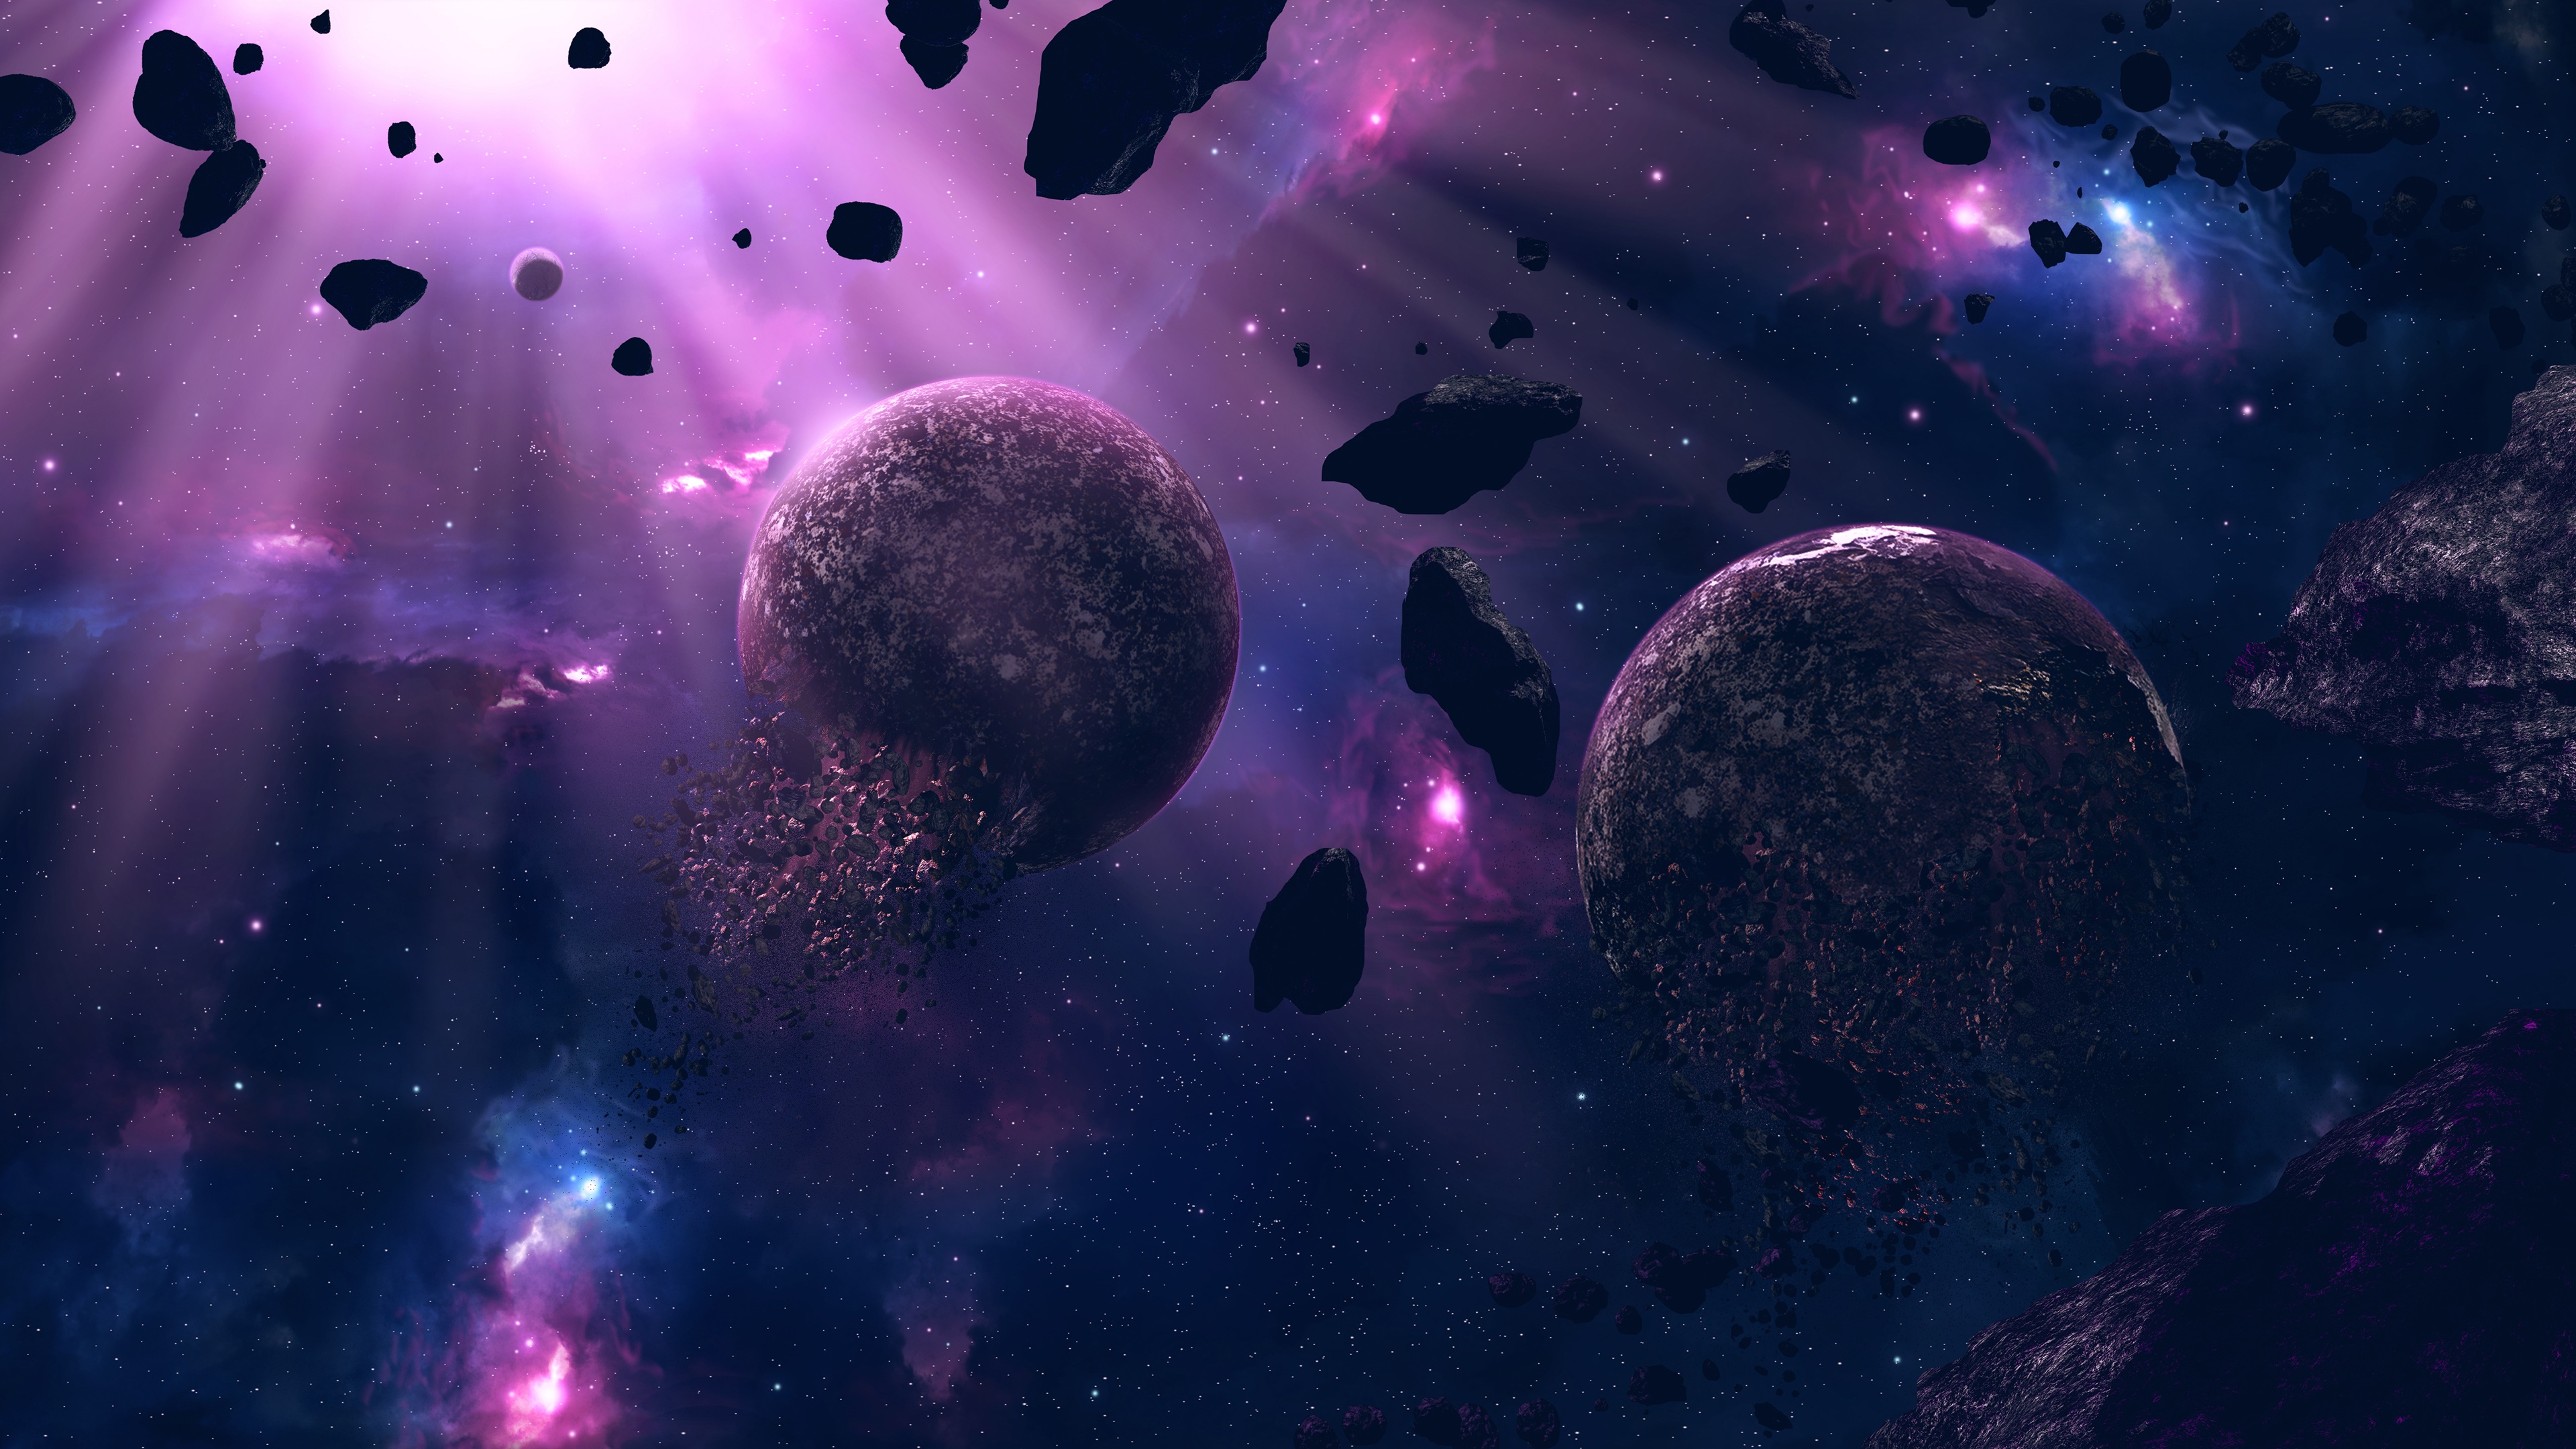 planets, explosion, sci fi, asteroid, planet, purple, space